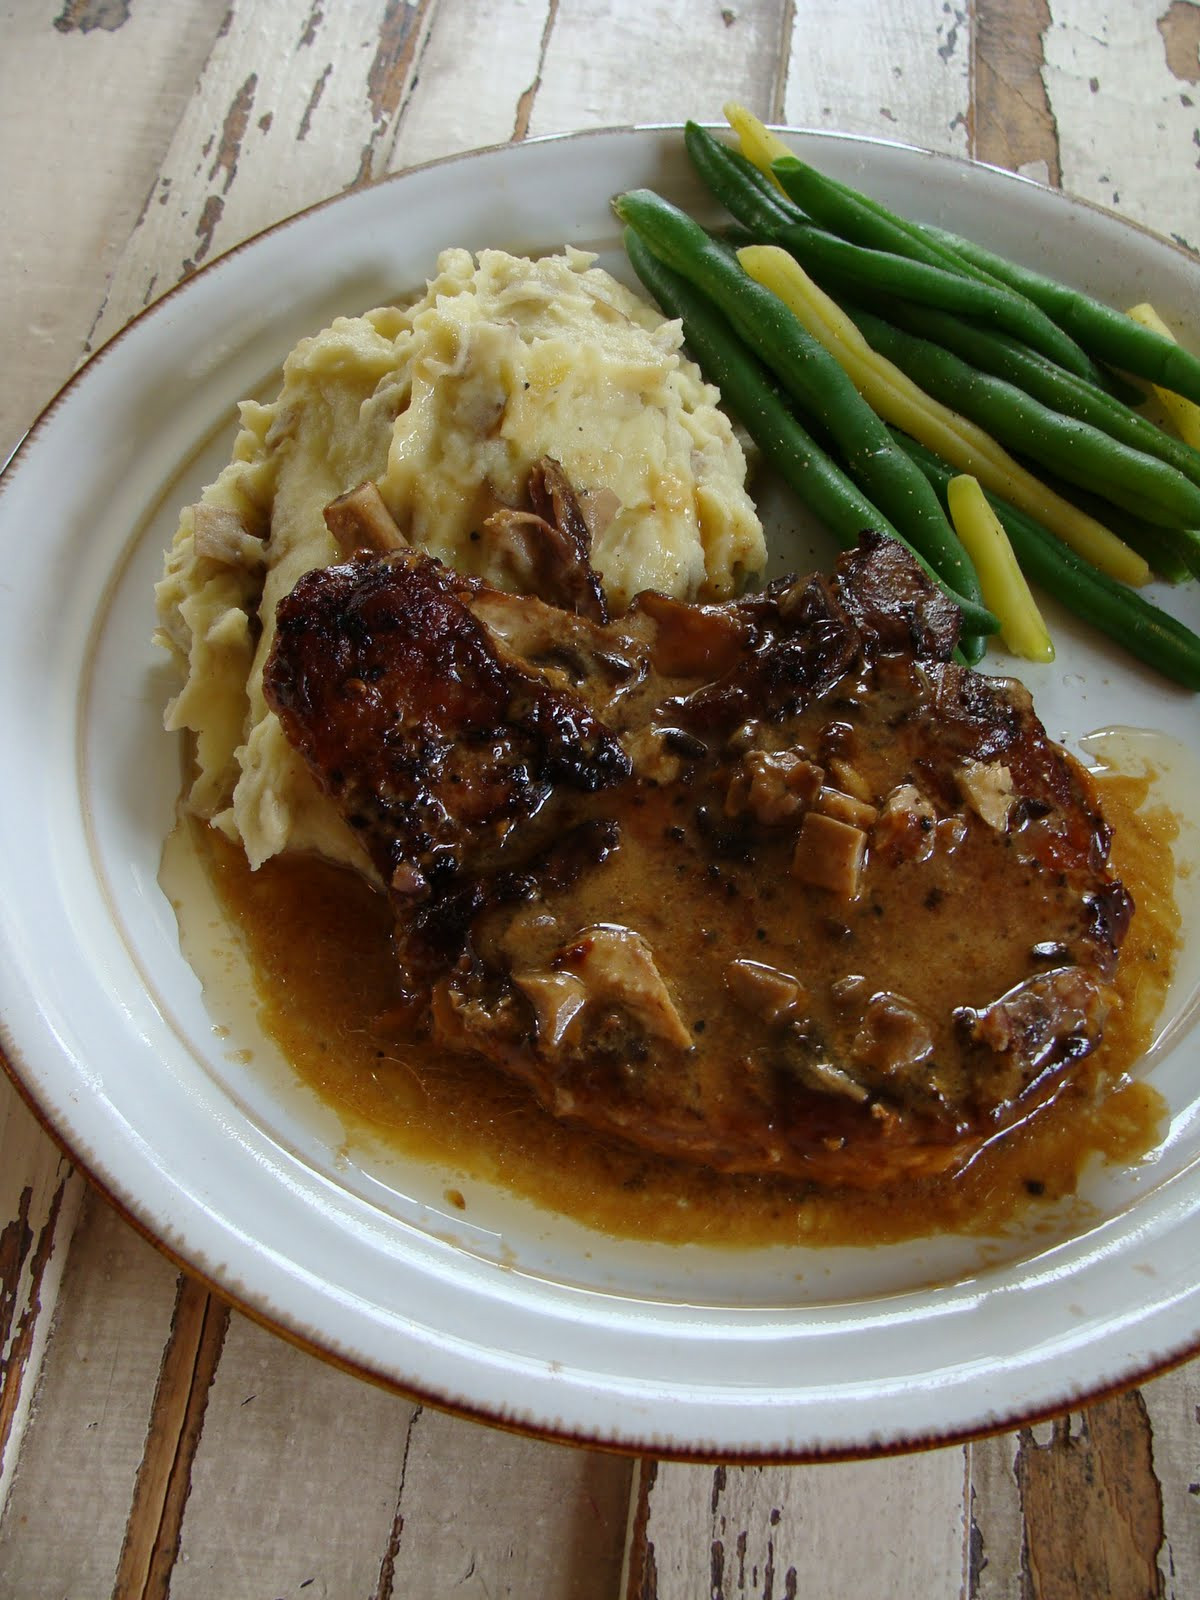 Slow Cooker Pork Chops And Gravy
 Just Cooking Slow Cooker Pork Chops with Mushroom Gravy